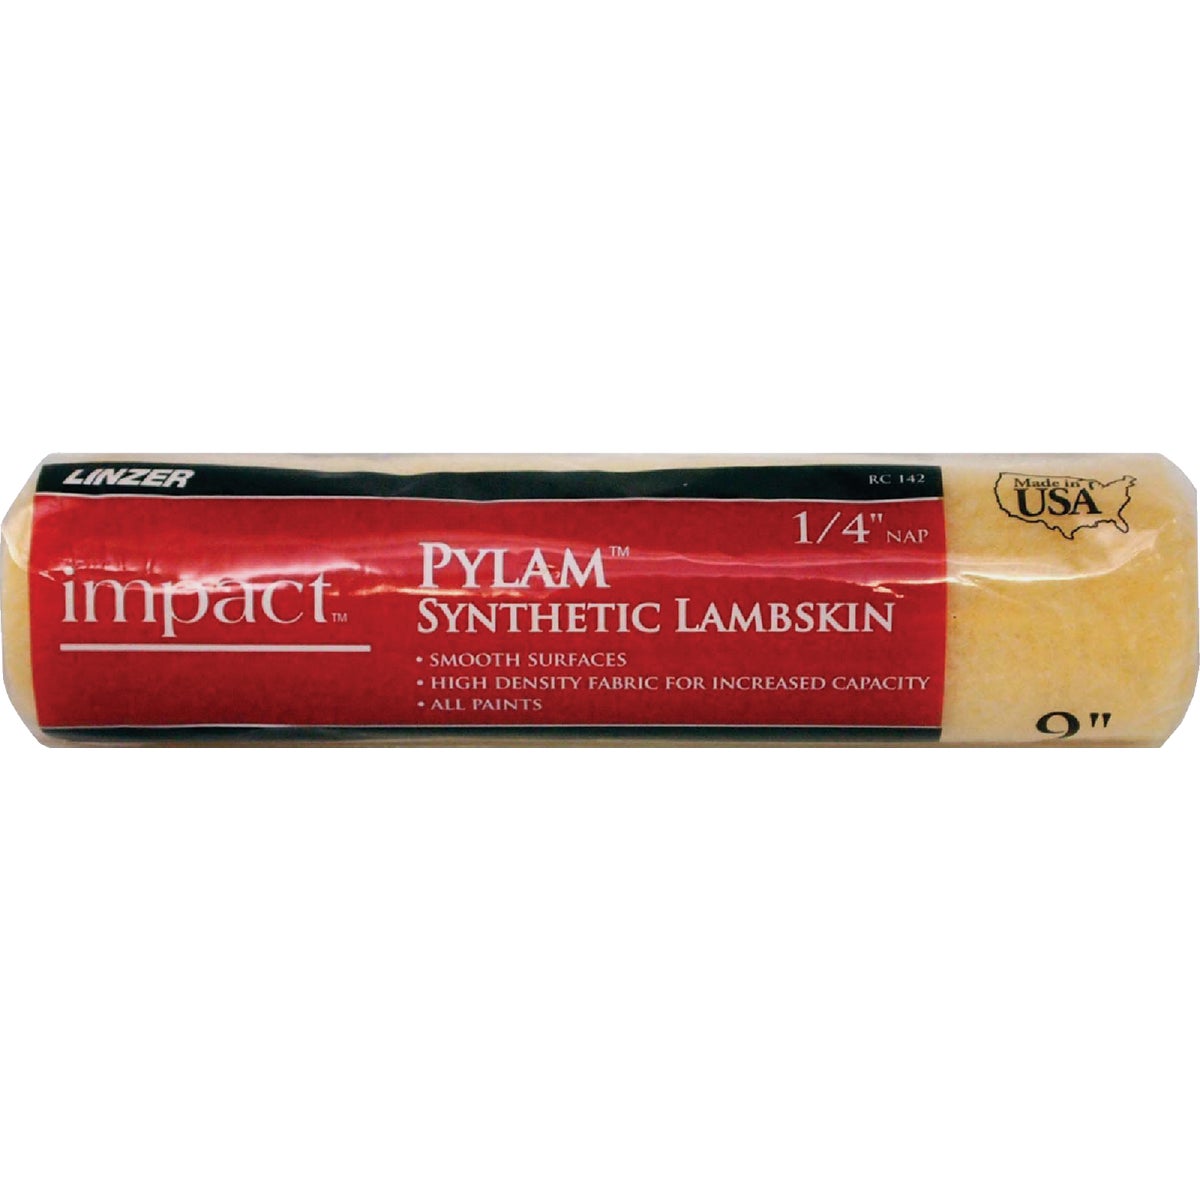 Item 772529, Pylam Synthetic Lambskin is for very rough surfaces.